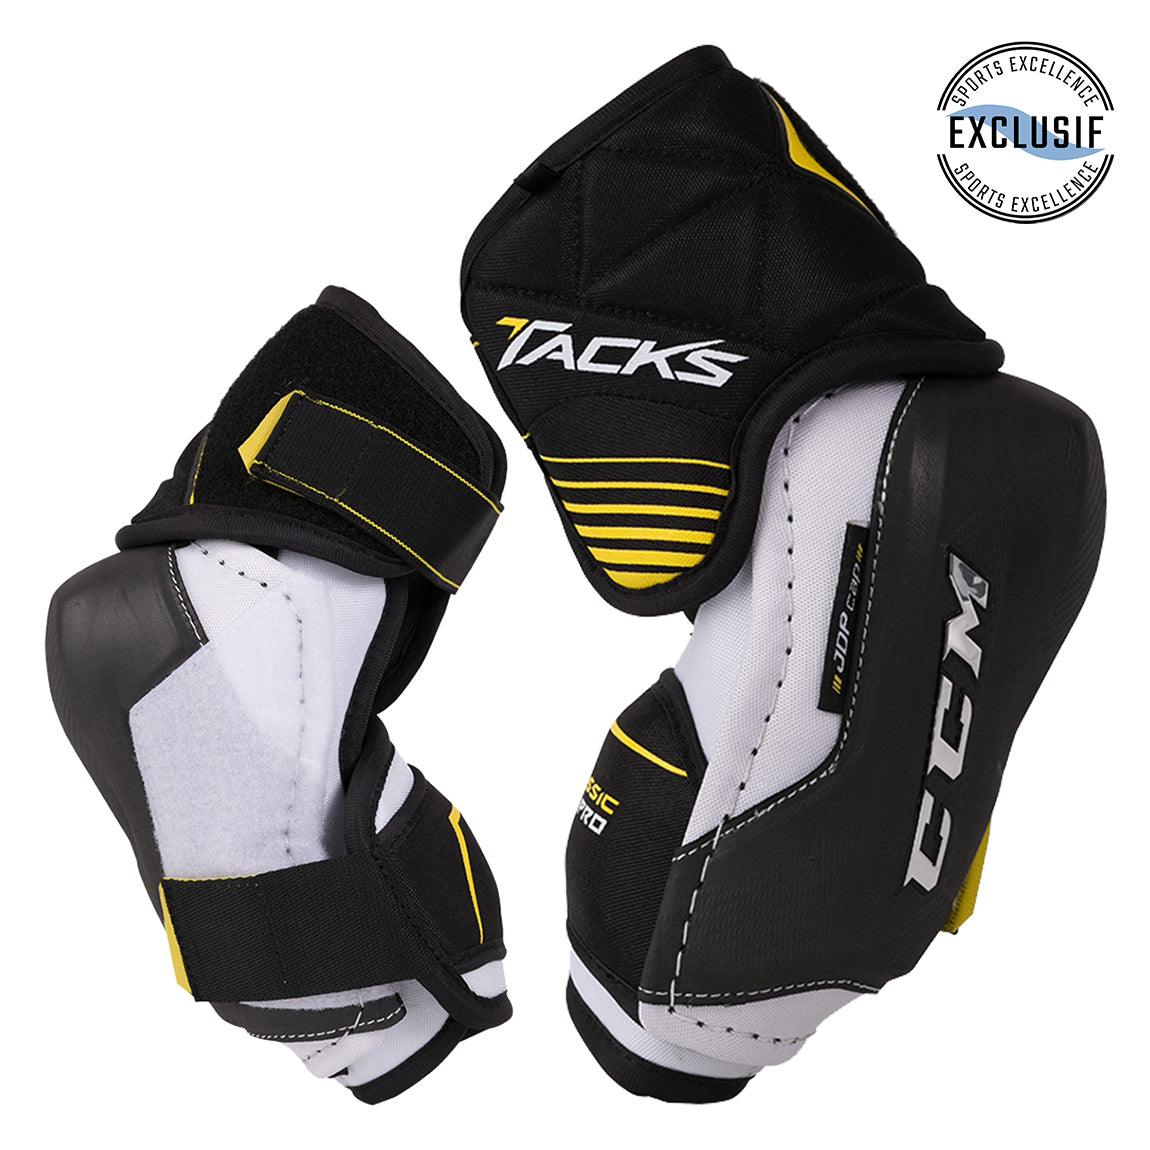 Senior Tacks Classic Pro Elbow Pads by CCM